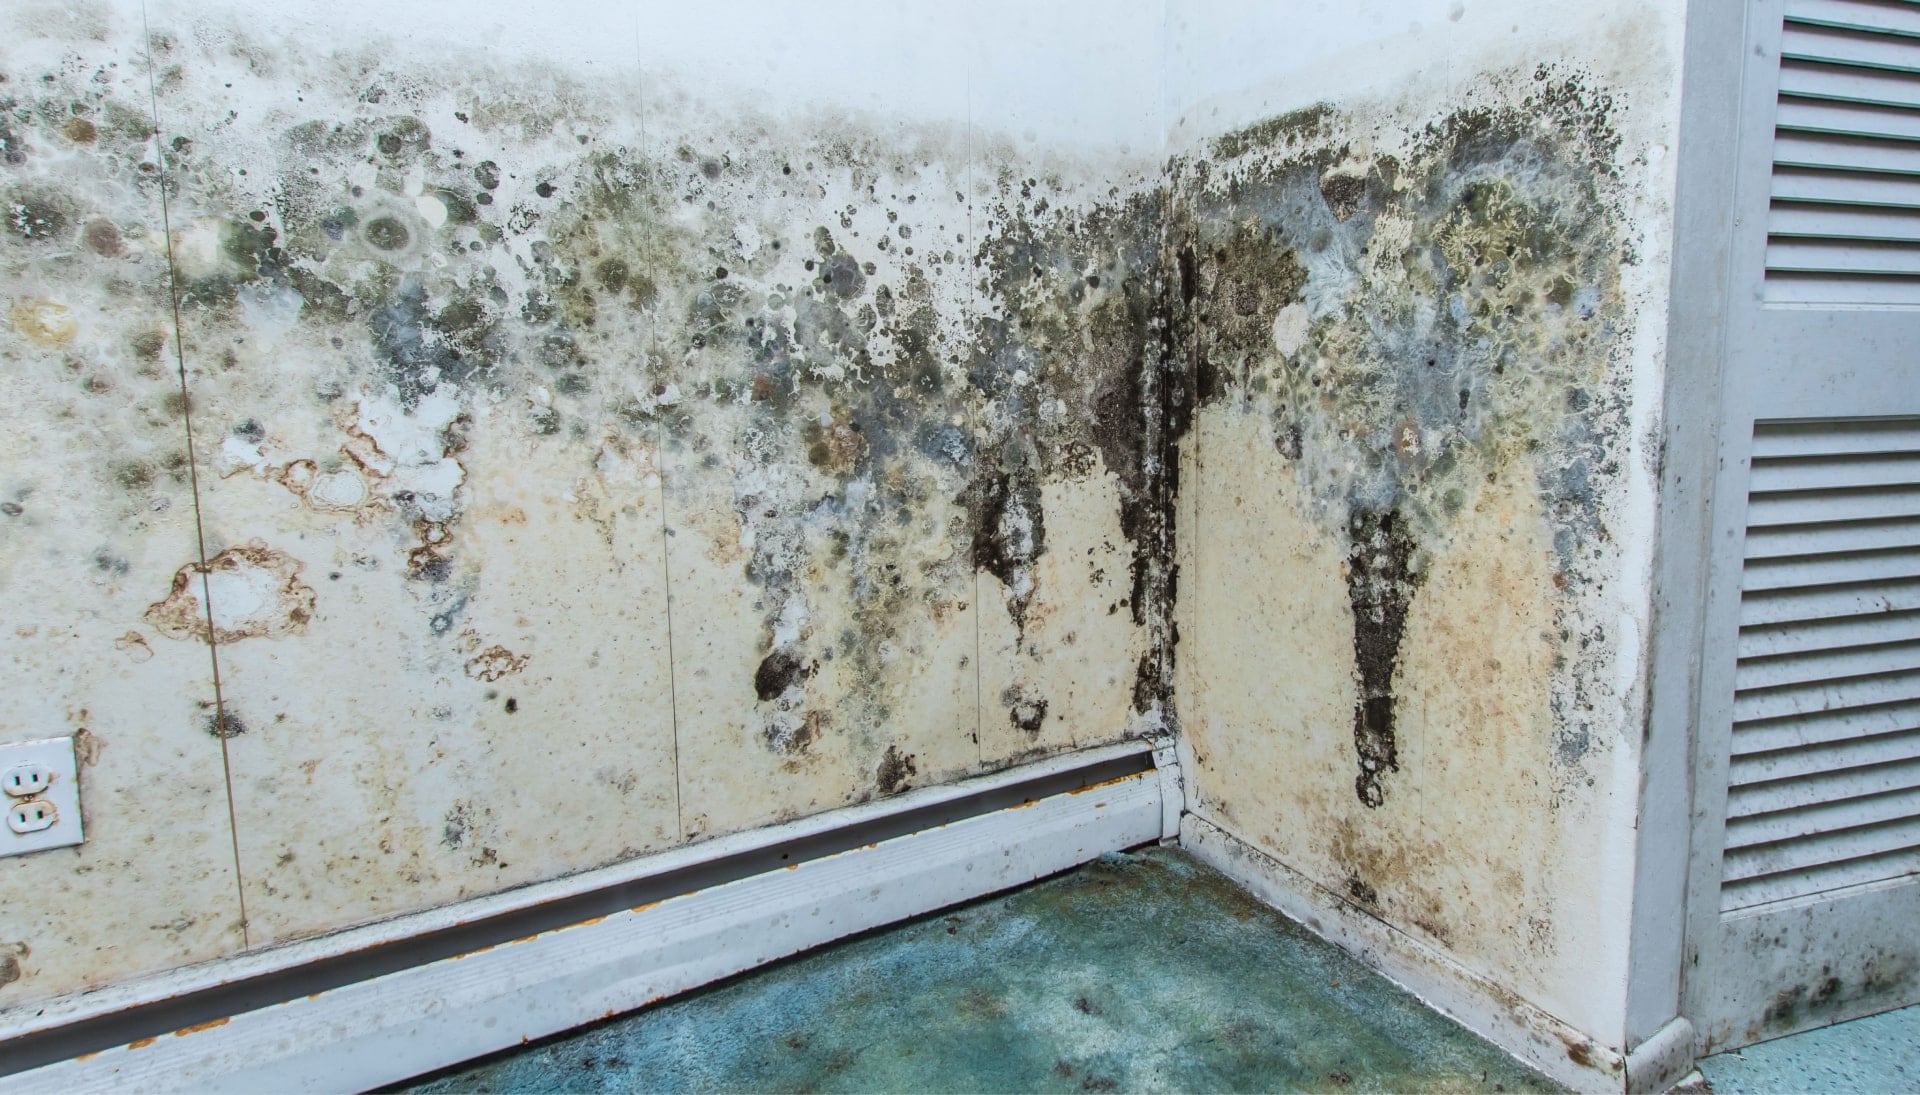 Professional mold removal, odor control, and water damage restoration service in Anchorage, Alaska.